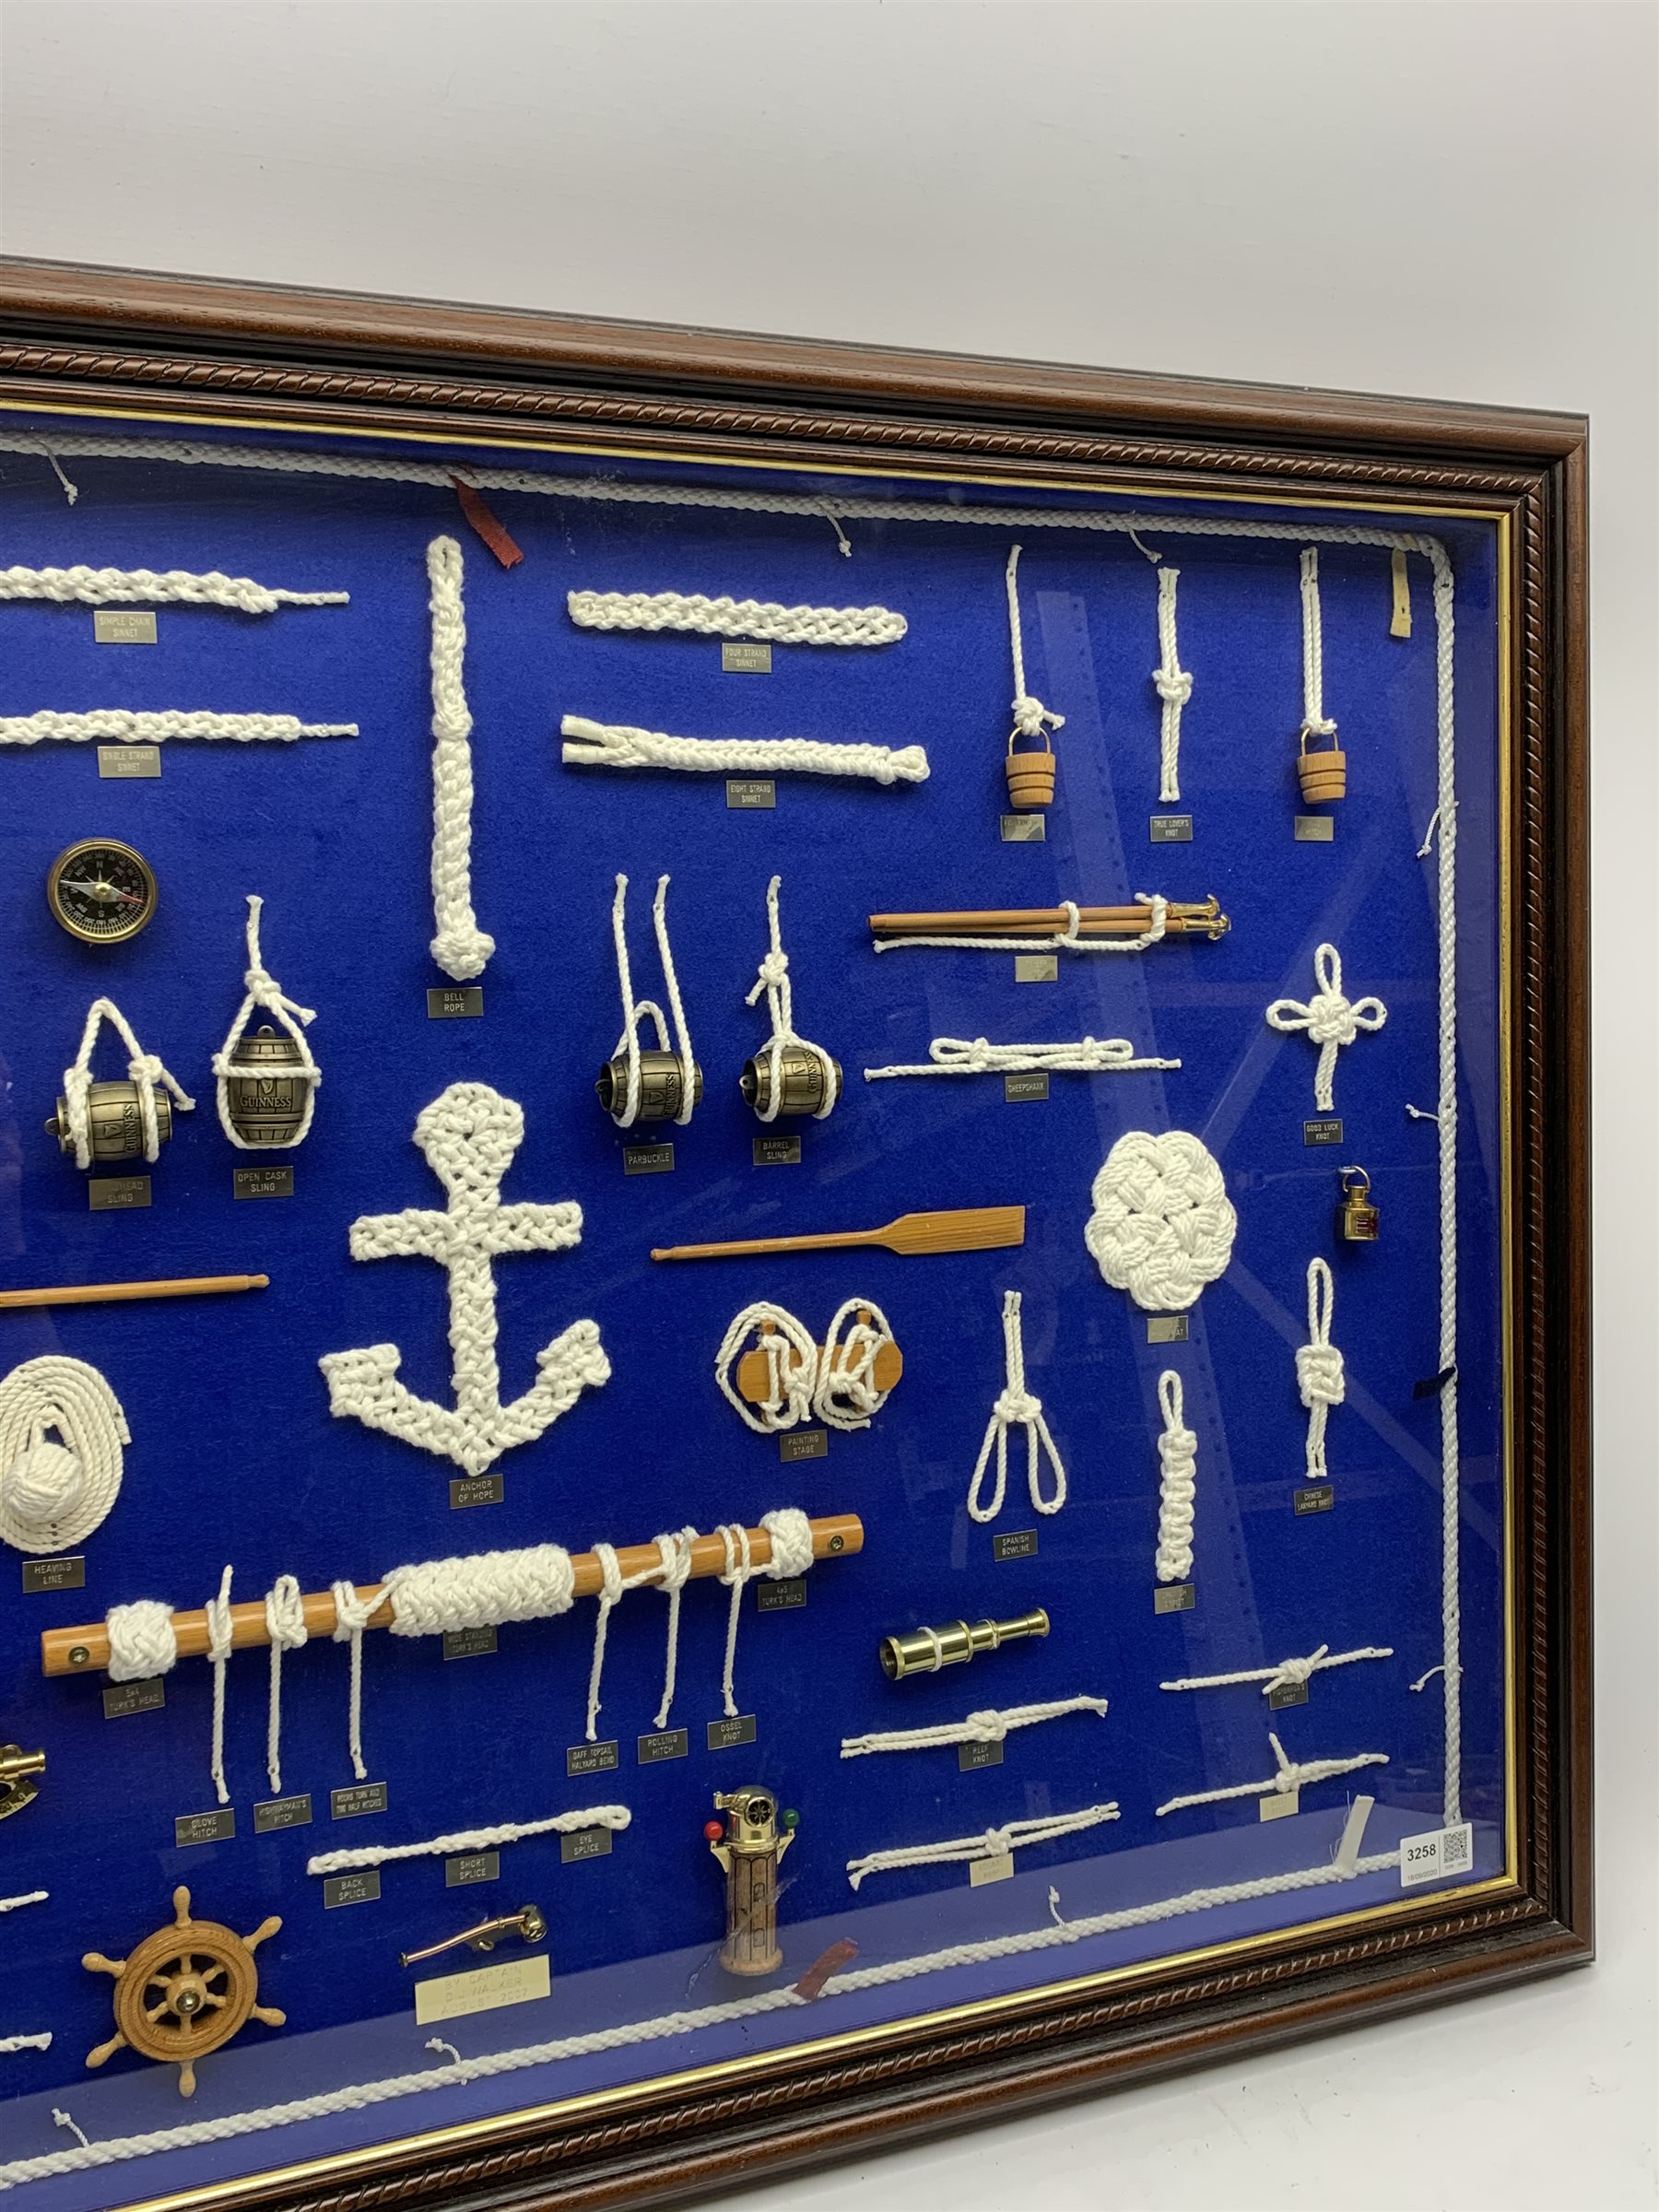 Large framed knot board, including miniature Binnacle, ships wheel and sextant, by Captain D.J.Walk - Image 3 of 3